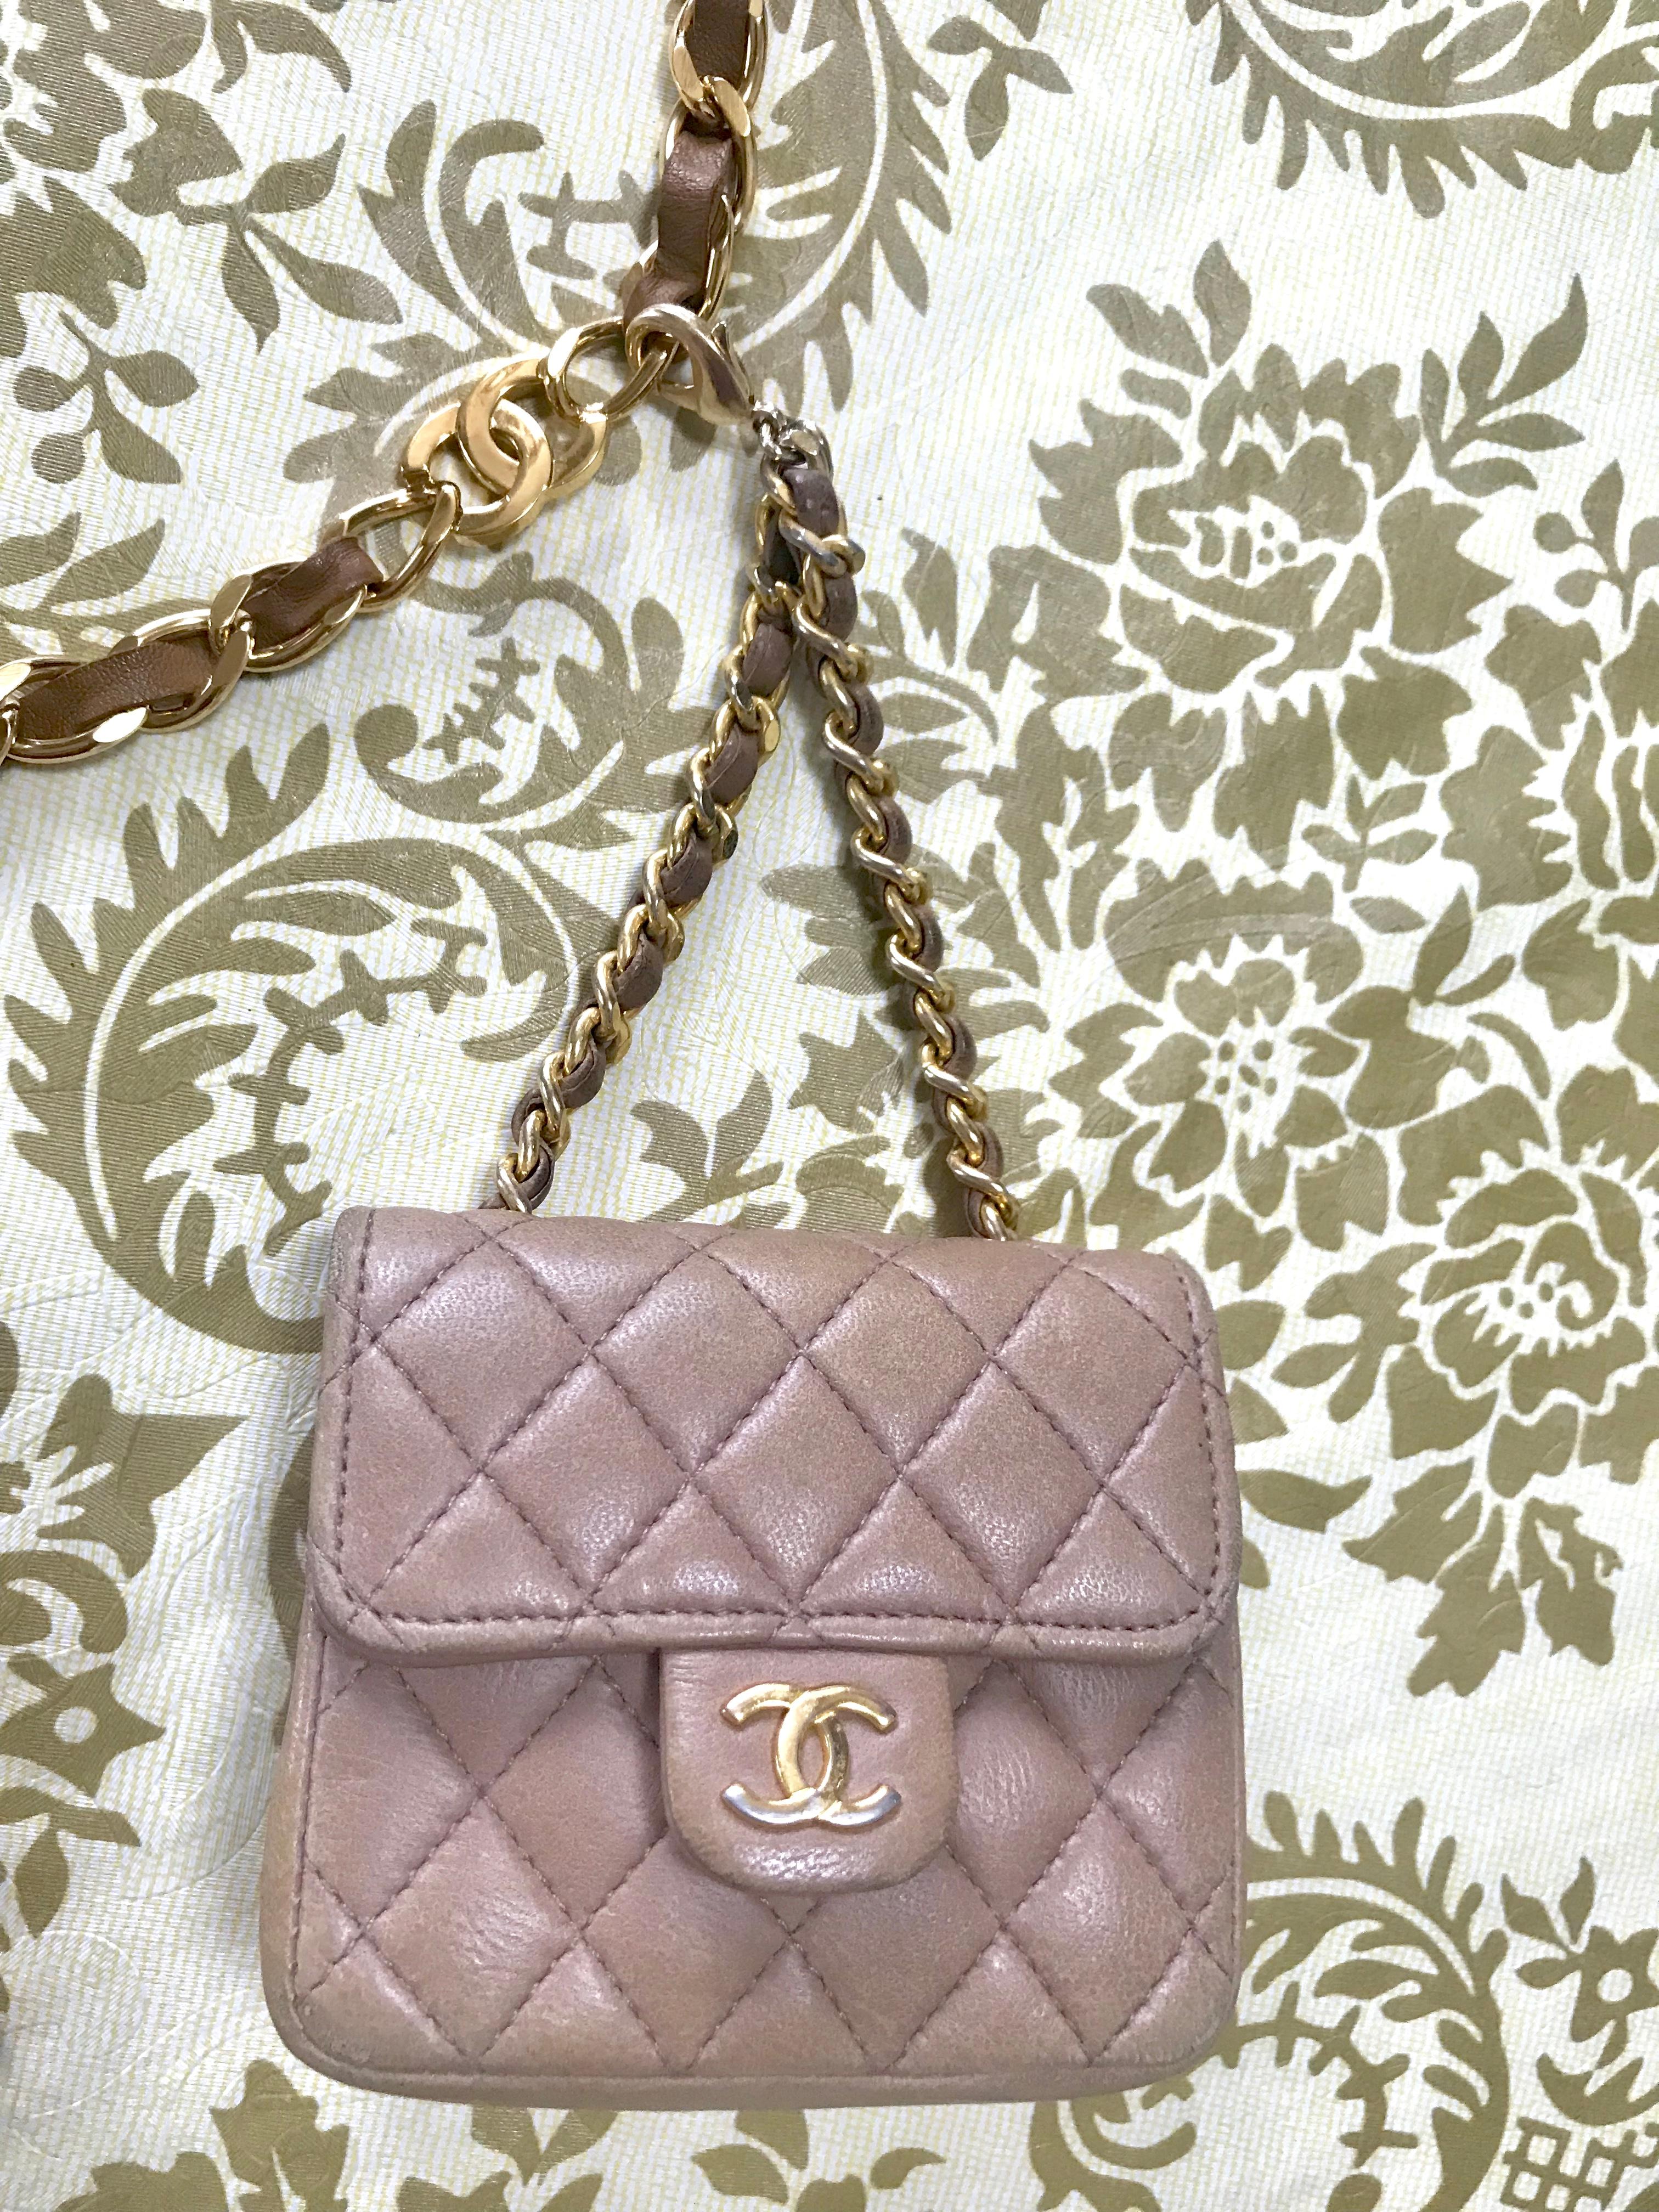 Chanel Vintage brown lambskin mini 2.55 bag charm and golden chain belt with CC In Good Condition For Sale In Kashiwa, Chiba